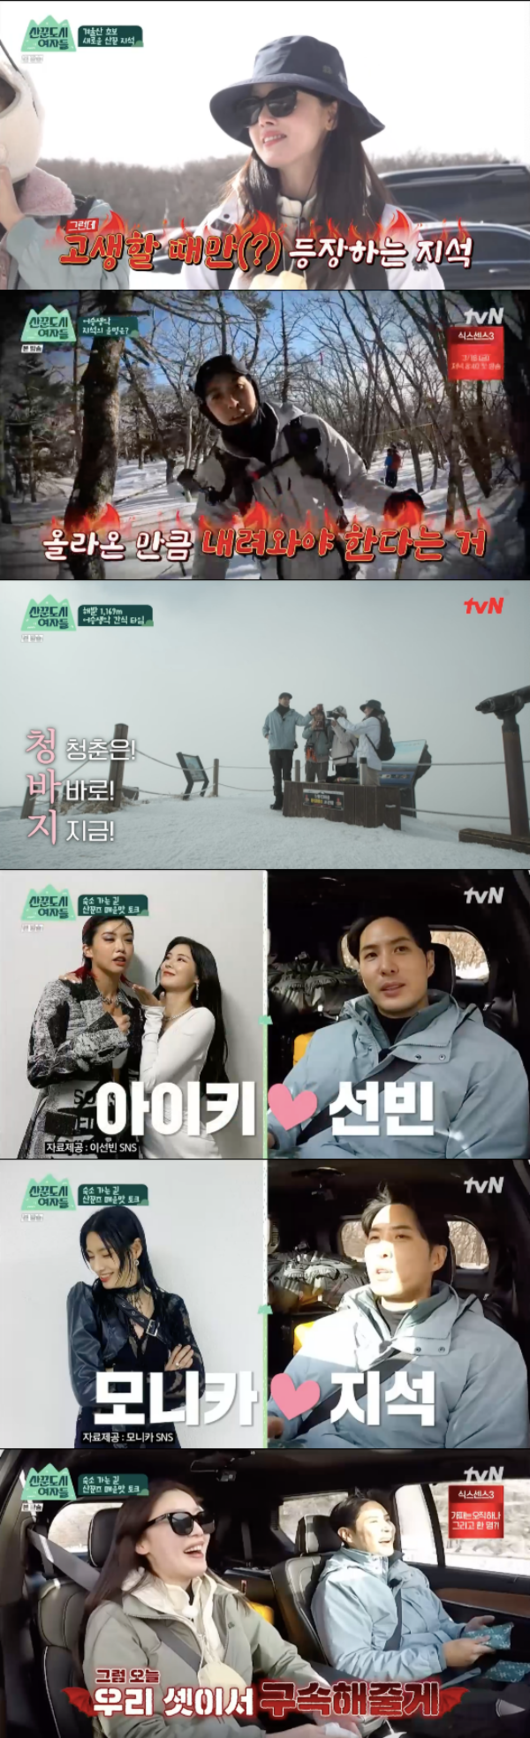 Sander City Women actor Kim Ji-seok cited Monica as his ideal type.On the 25th night at 8:40 pm, TVN City Women, the figure of the mountaineers who visited Jeju Island to climb Hallasan was broadcast.Actor Kim Ji-seok, who starred in The Drinkers City Women, also visited Jeju Island to climb the Santos and Hallasan.At the advent of Kim Ji-Seok, the three were delighted and asked, How did you think of climbing Hallasan?Kim Ji-seok said, The drama is good, so I came to put a spoon because I thought the entertainment would be good.Kim Ji-seok said that Sulsan was the first time, and he was confident that he was only climbing Mt. Namsan.They decided to go to the rehearsal car first, and when they reach the top, they can look down at Hallasan, Chujado, Byangdo, and Seongsan Ilchulbong at a glance.At 1:30 p.m., the four men began climbing. The four of them strode up the mountain, wearing Eisen.They lost their horses shortly afterwards.Kim Ji-seok said, I have not come in half, but I am already breathing. Lee Sun-bin also said, It is harder to use a mask.Kim Ji-seok said, When I came to the camp, I went camping and thought it was a broadcast where I ate delicious food and had a drink. Suddenly I was (embarrassed) because I was going to Hallasan.This is practice, is it not going to run away when you climb Hallasan tomorrow? said Lee Sun-bin, who replied, Ill do it with steamed real.As they climbed the mountain, they rested at a simple shelter made by hikers. Kim Ji-seok, who climbed the mountain again, asked hikers, Are there still a lot left?The climber replied, Its almost there. Kim Ji-seok said, People who climb mountains talk like that.Thats the feeling of the people coming down, Han Sun-hwa said, clearly interpreting.After a successful Hallasan rehearsal, they drove together to the hostel; Kim Ji-seok asked, What do you talk about if youre girls alone?Lee Sun-bin said, I have a lot of unnecessary conversations, and then suddenly I have another nutritional value and I go back and forth.Jung Eun-ji asked, So what do the men talk about? Kim Ji-seok honestly replied, I talk about women.Jung Eun-ji asked Kim Ji-seok, What reason do you feel attractive to? Kim Ji-seok said, Sunbin likes Aiki, I like Monica.I was against the appearance of the anger. I just wanted to be confused and pointed out. Those who arrived at the hostel set up a room by ladder ride; Jung Eun-ji was assigned a two-bedroom and Han Sun-hwa, who booked the hostel himself, was left in a one-bedroom.They were tired of beer, preparing for dinner as drinkers City women. Han Sun-hwa cooked the chicken with skill and Jung Eun-ji boiled kimchi stew.Kim Ji-Seok helped collect garbage and set up dinner tablesJung Eun-ji, who enjoyed a lot of dinner, asked Kim Ji-seok, We had a brother in the drama, but now we are treating him.How about it?Kim Ji-seok replied, I can not adapt.Kim Ji-seok cited god as the most amazing entertainer after his debut, saying, I made my debut as a five-member dance group Rio in 2001.He showed off an impromptu rap and was applauded by the Santoons.TVN Sander City Women broadcast screen capture